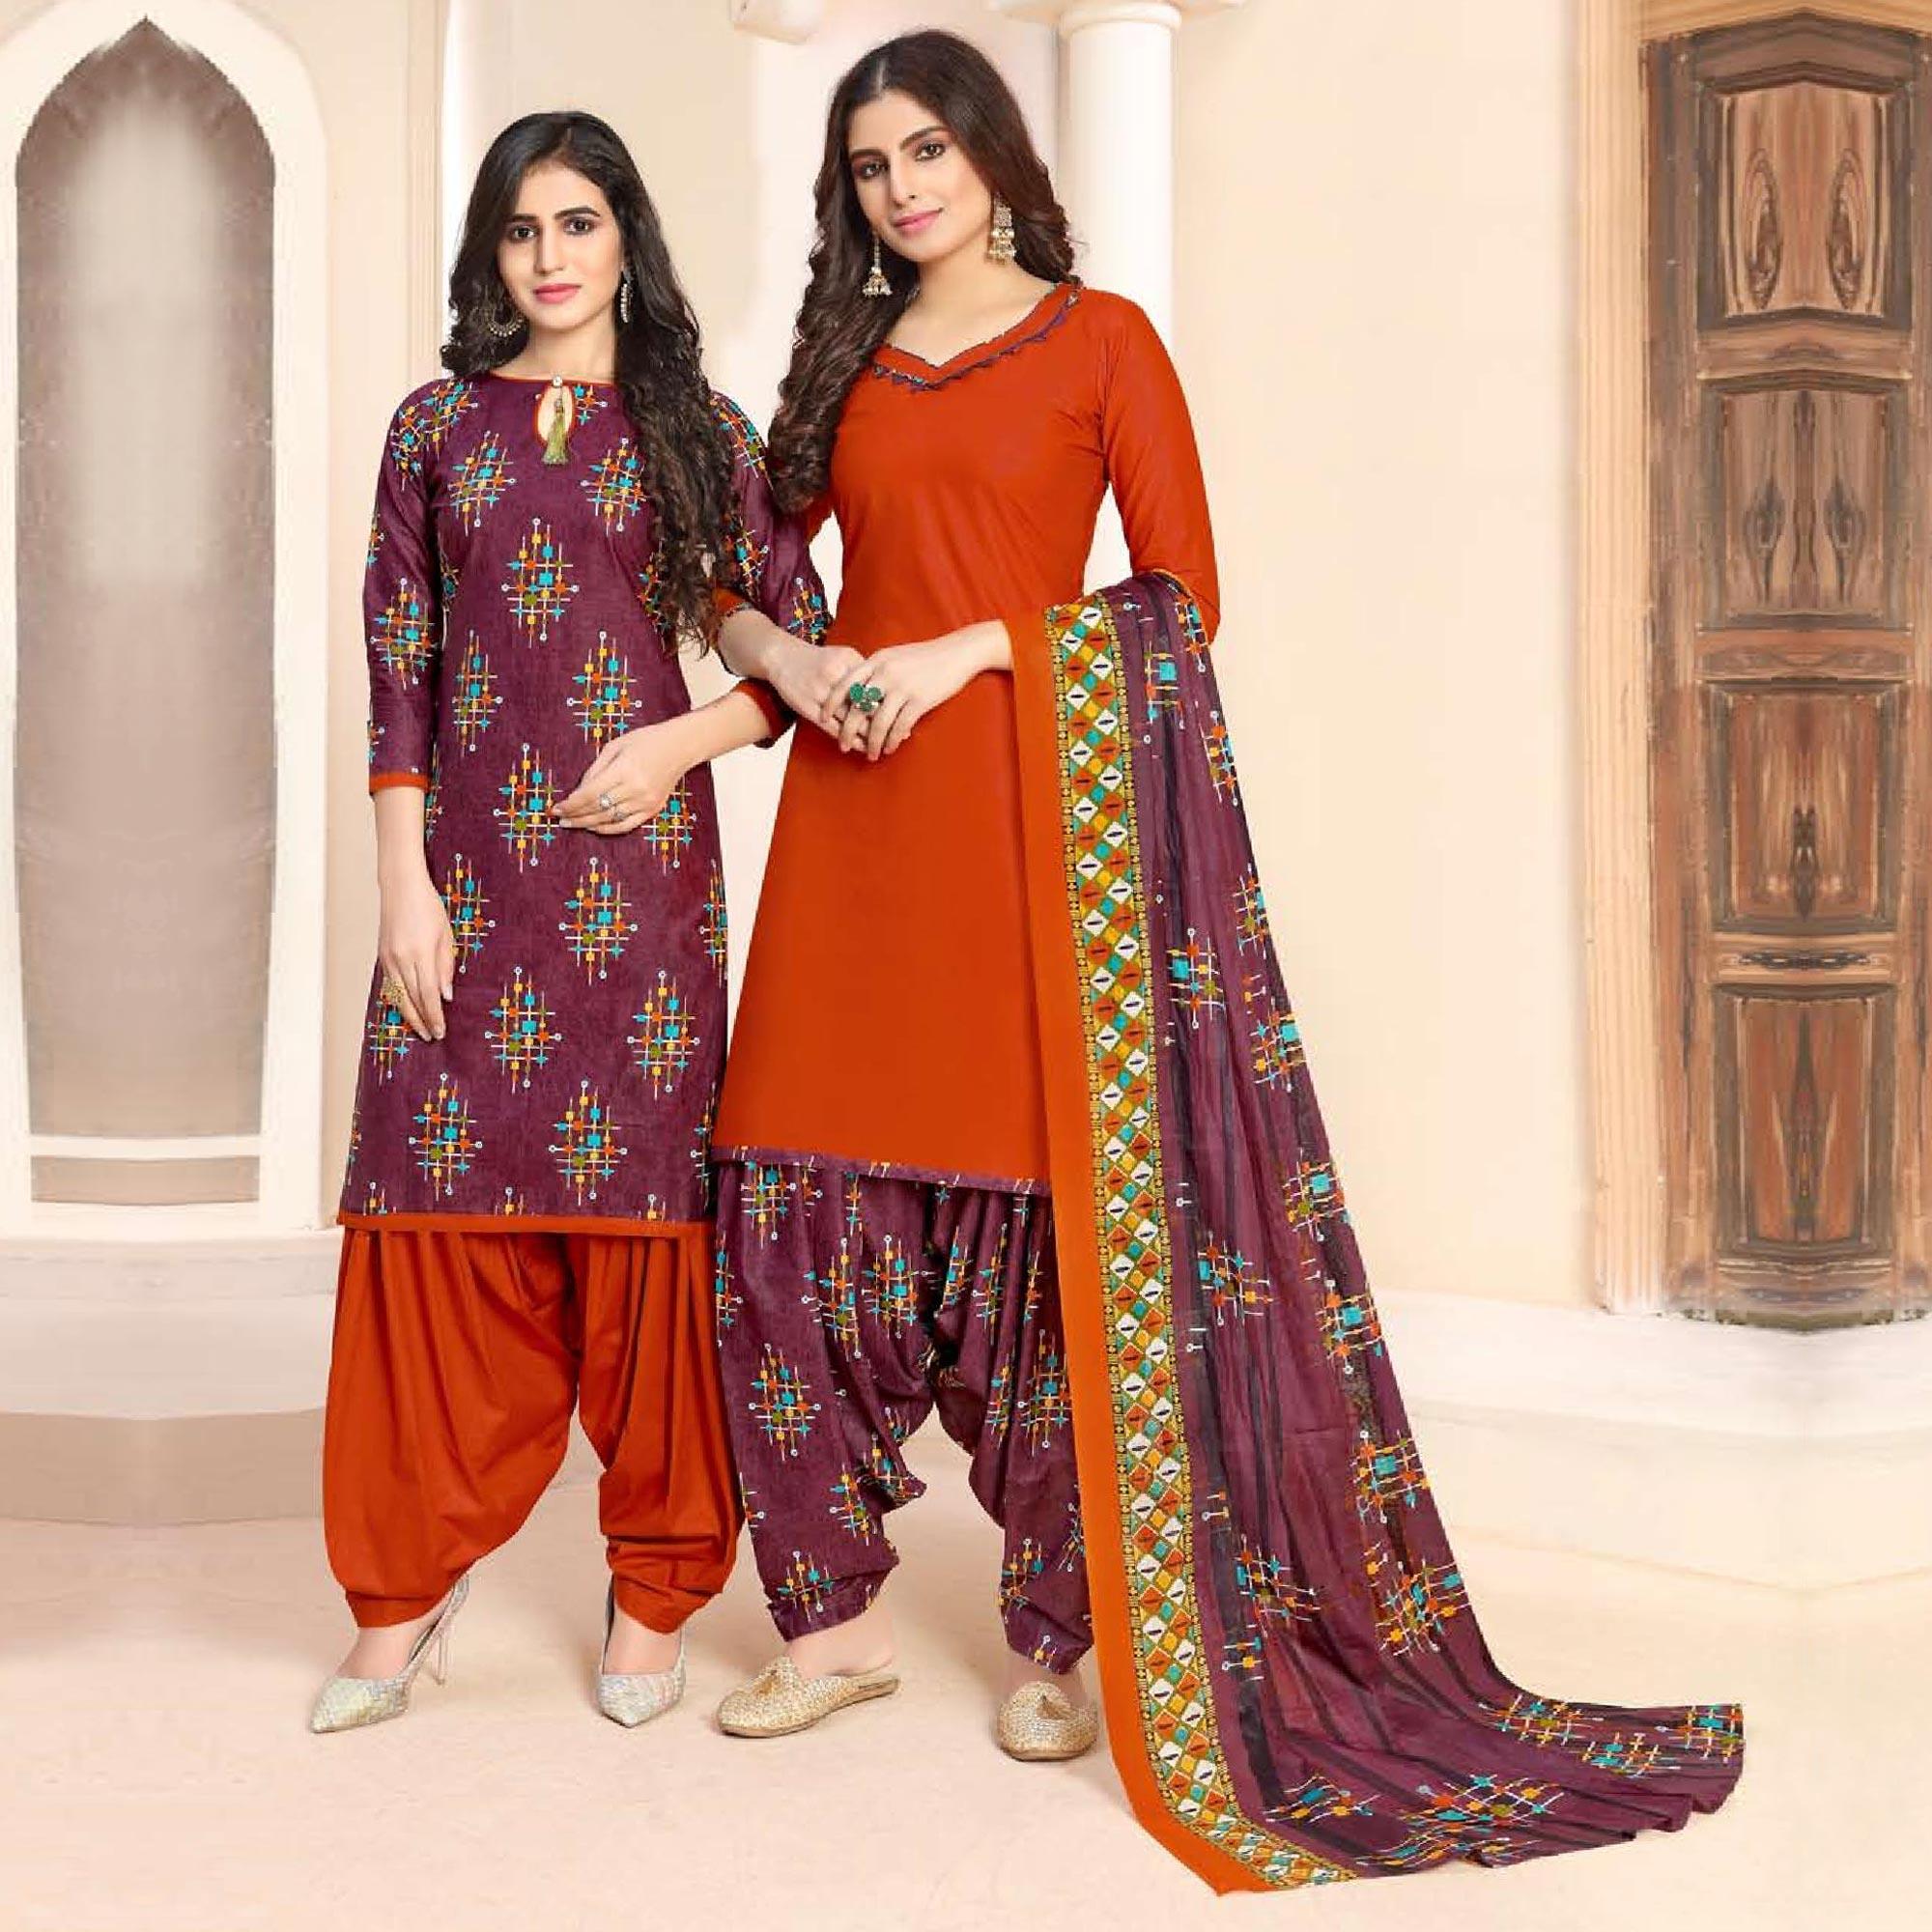 Lovely Purple - Orange Colored Colored Casual Wear Printed Cotton Patiala Dress Material - Peachmode